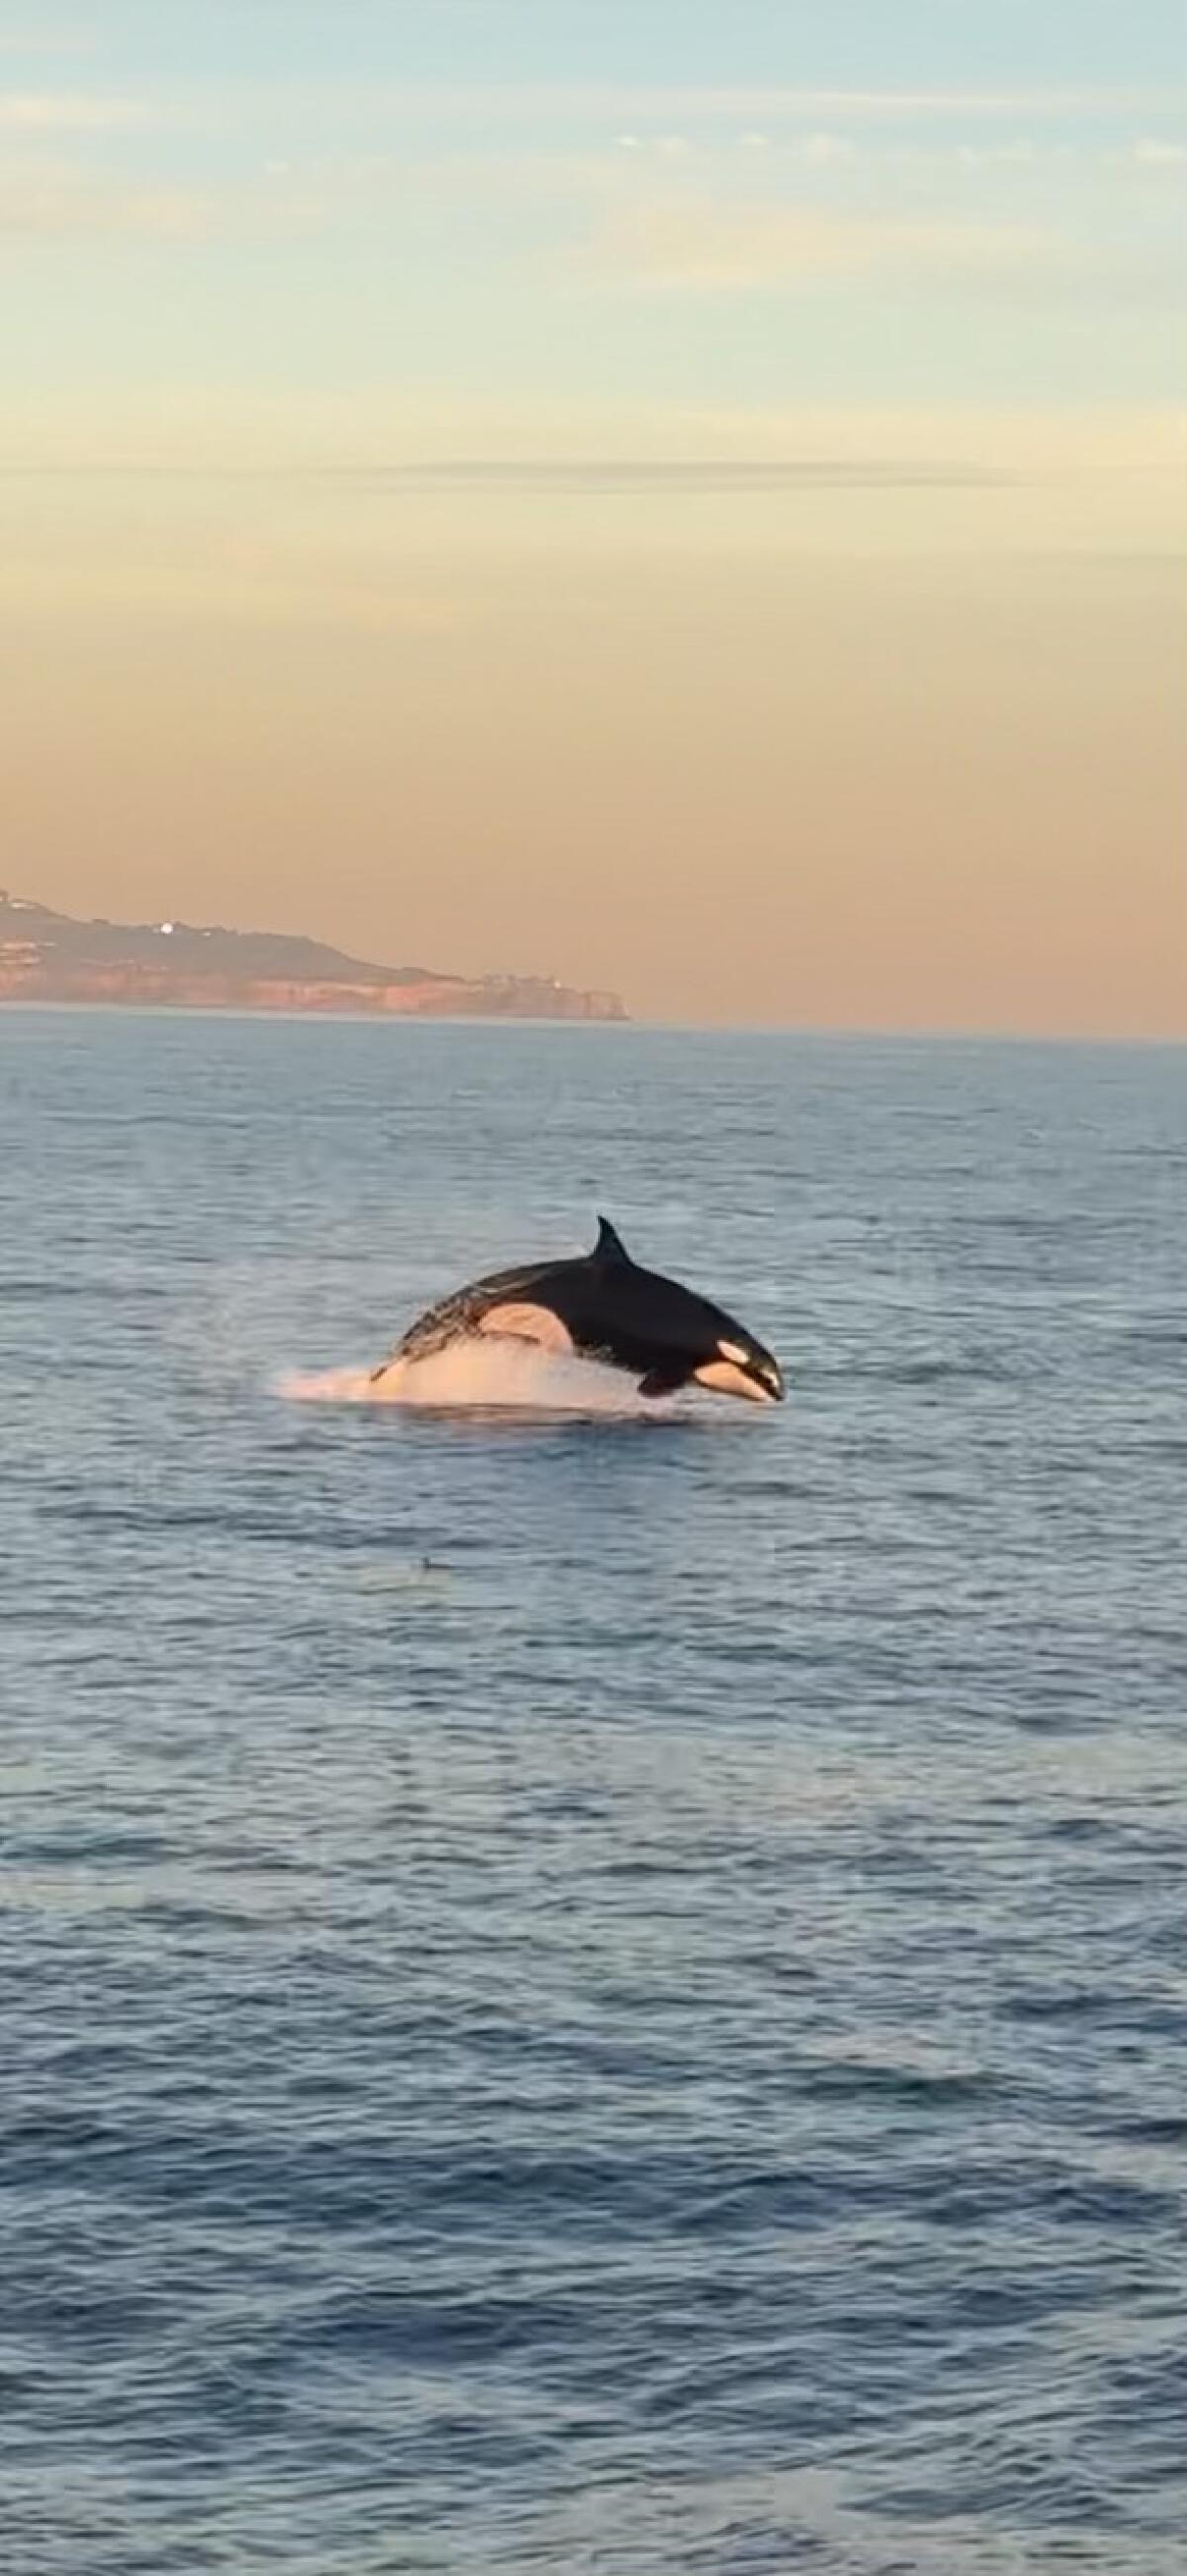 An orca is photographed near Palos Verdes Peninsula on Dec. 11. It's believed they're native to Mexico and Central America.